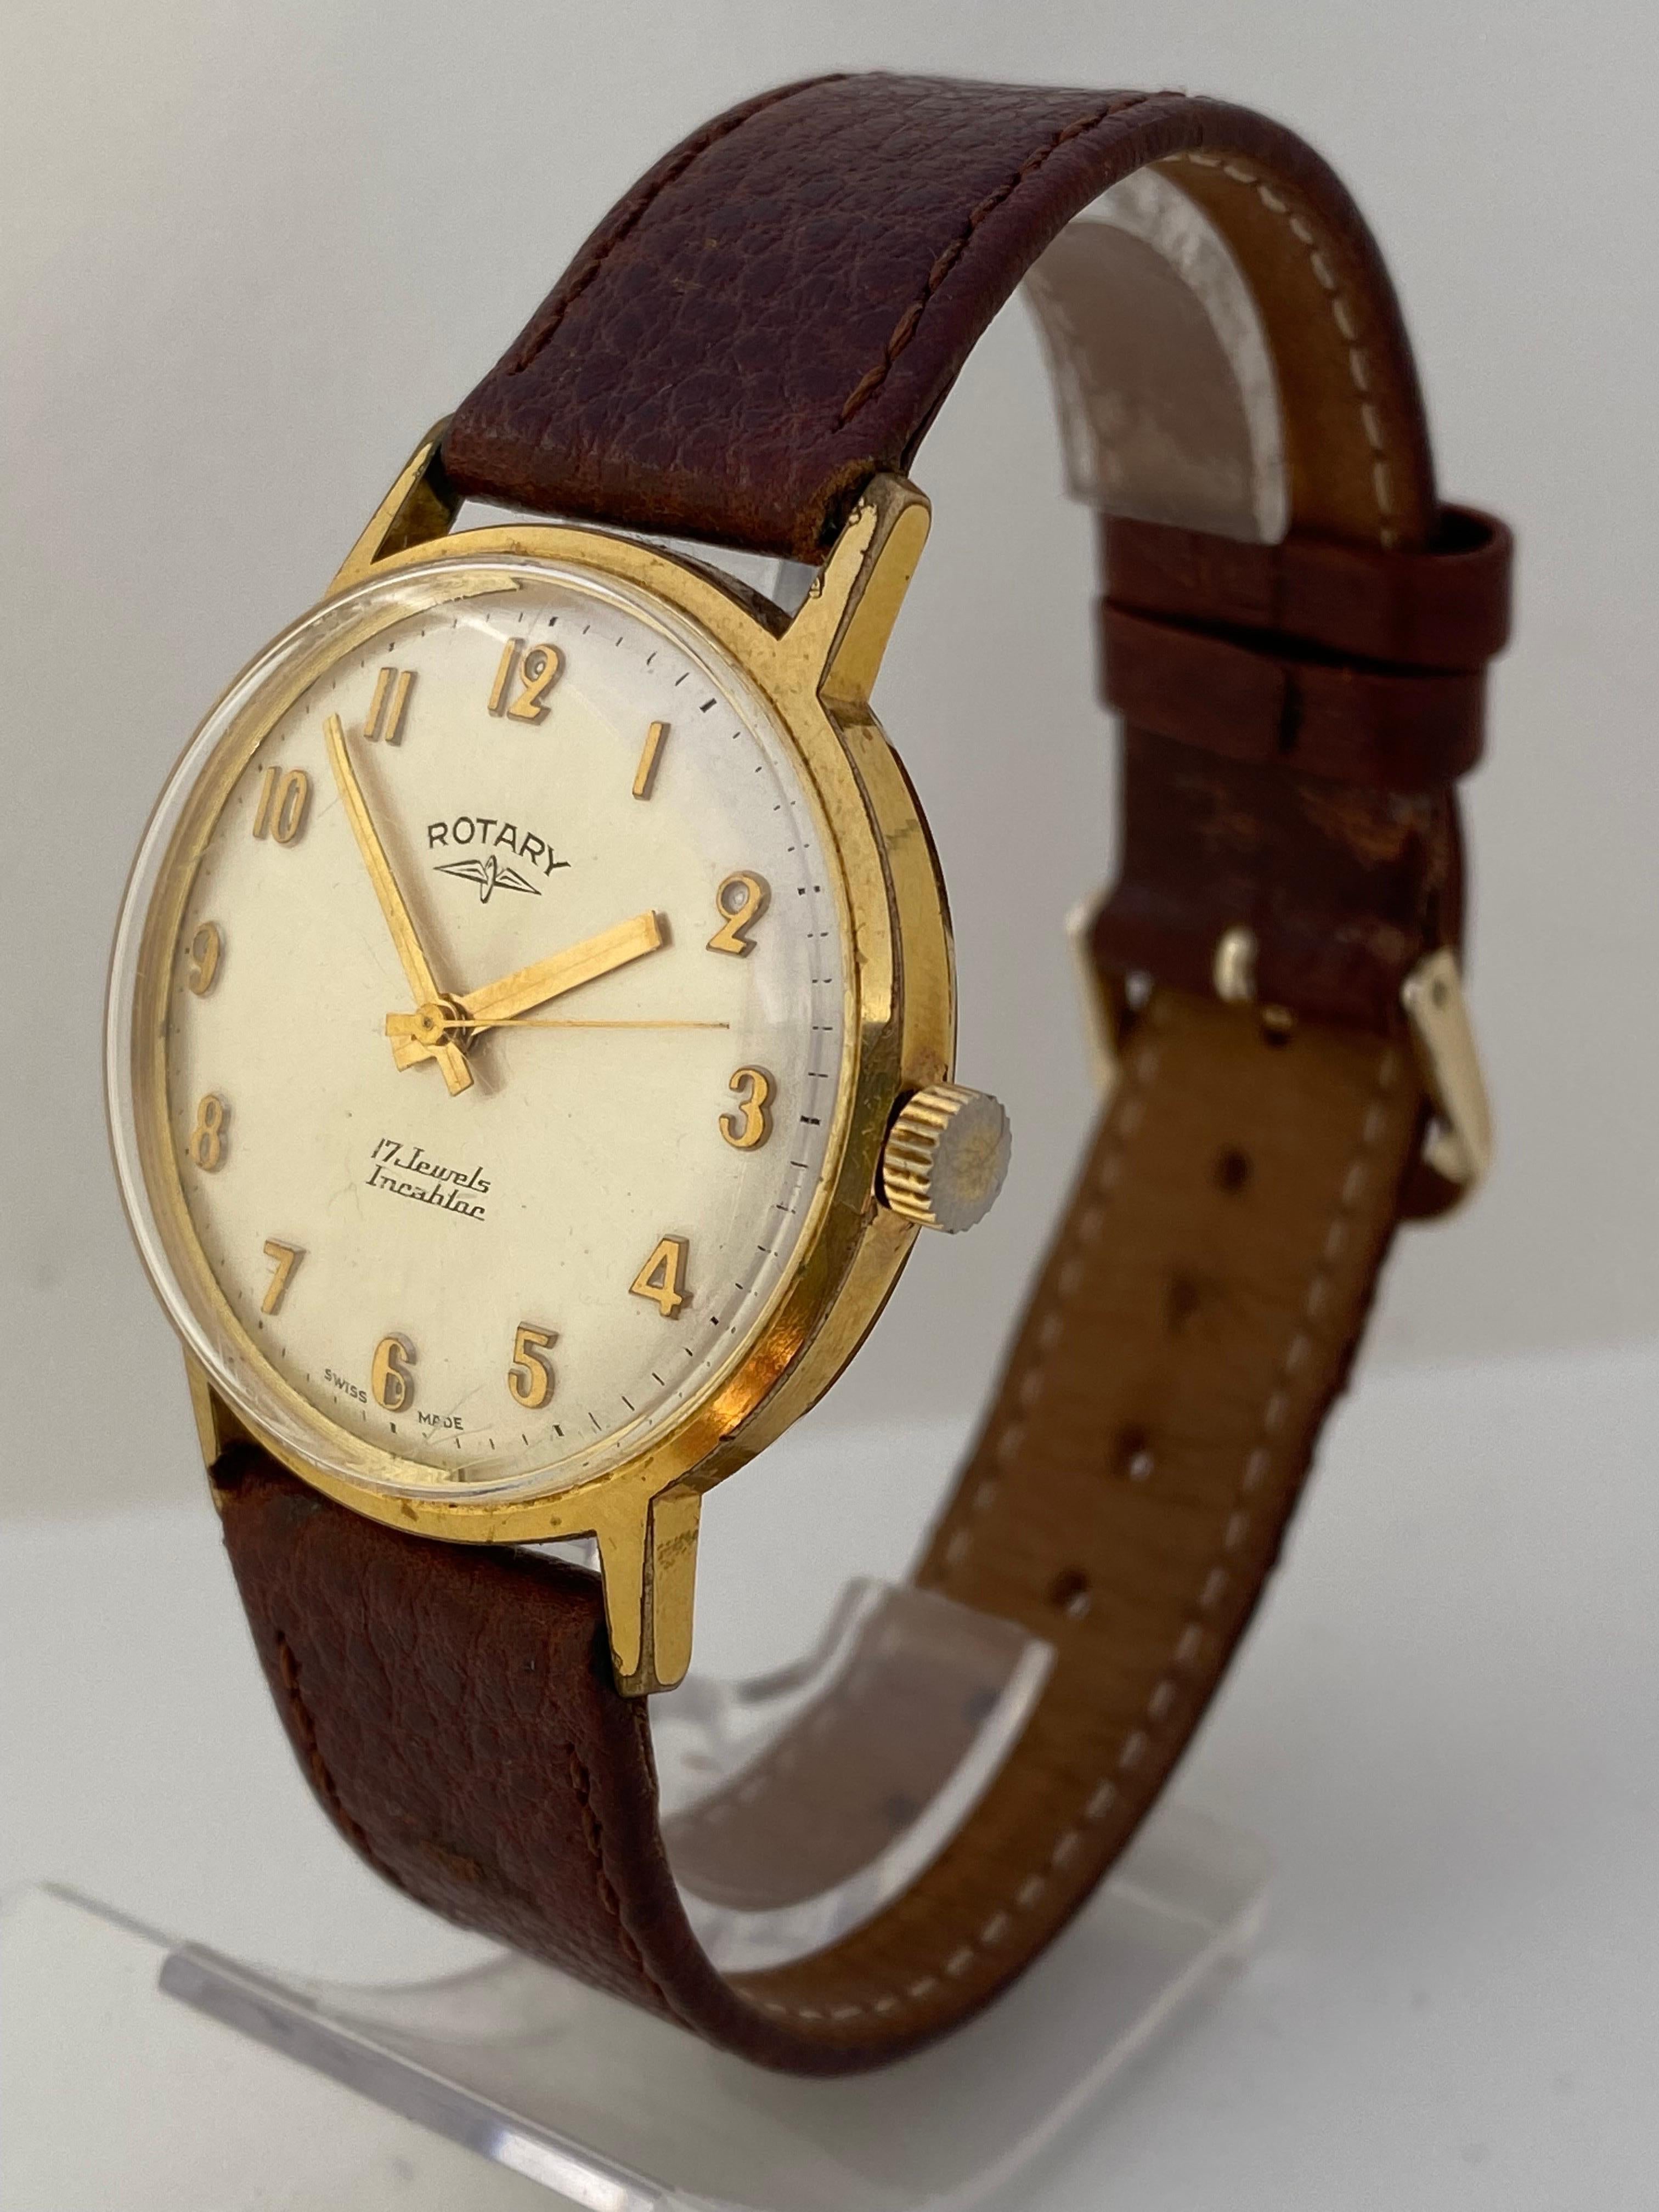 This beautiful 35mm diameter hand winding Swiss mechanical watch is in good working condition and it is running well. Visible signs of ageing and wear with very tiny light marks on the glass surface and on the gold plated and stainless back watch